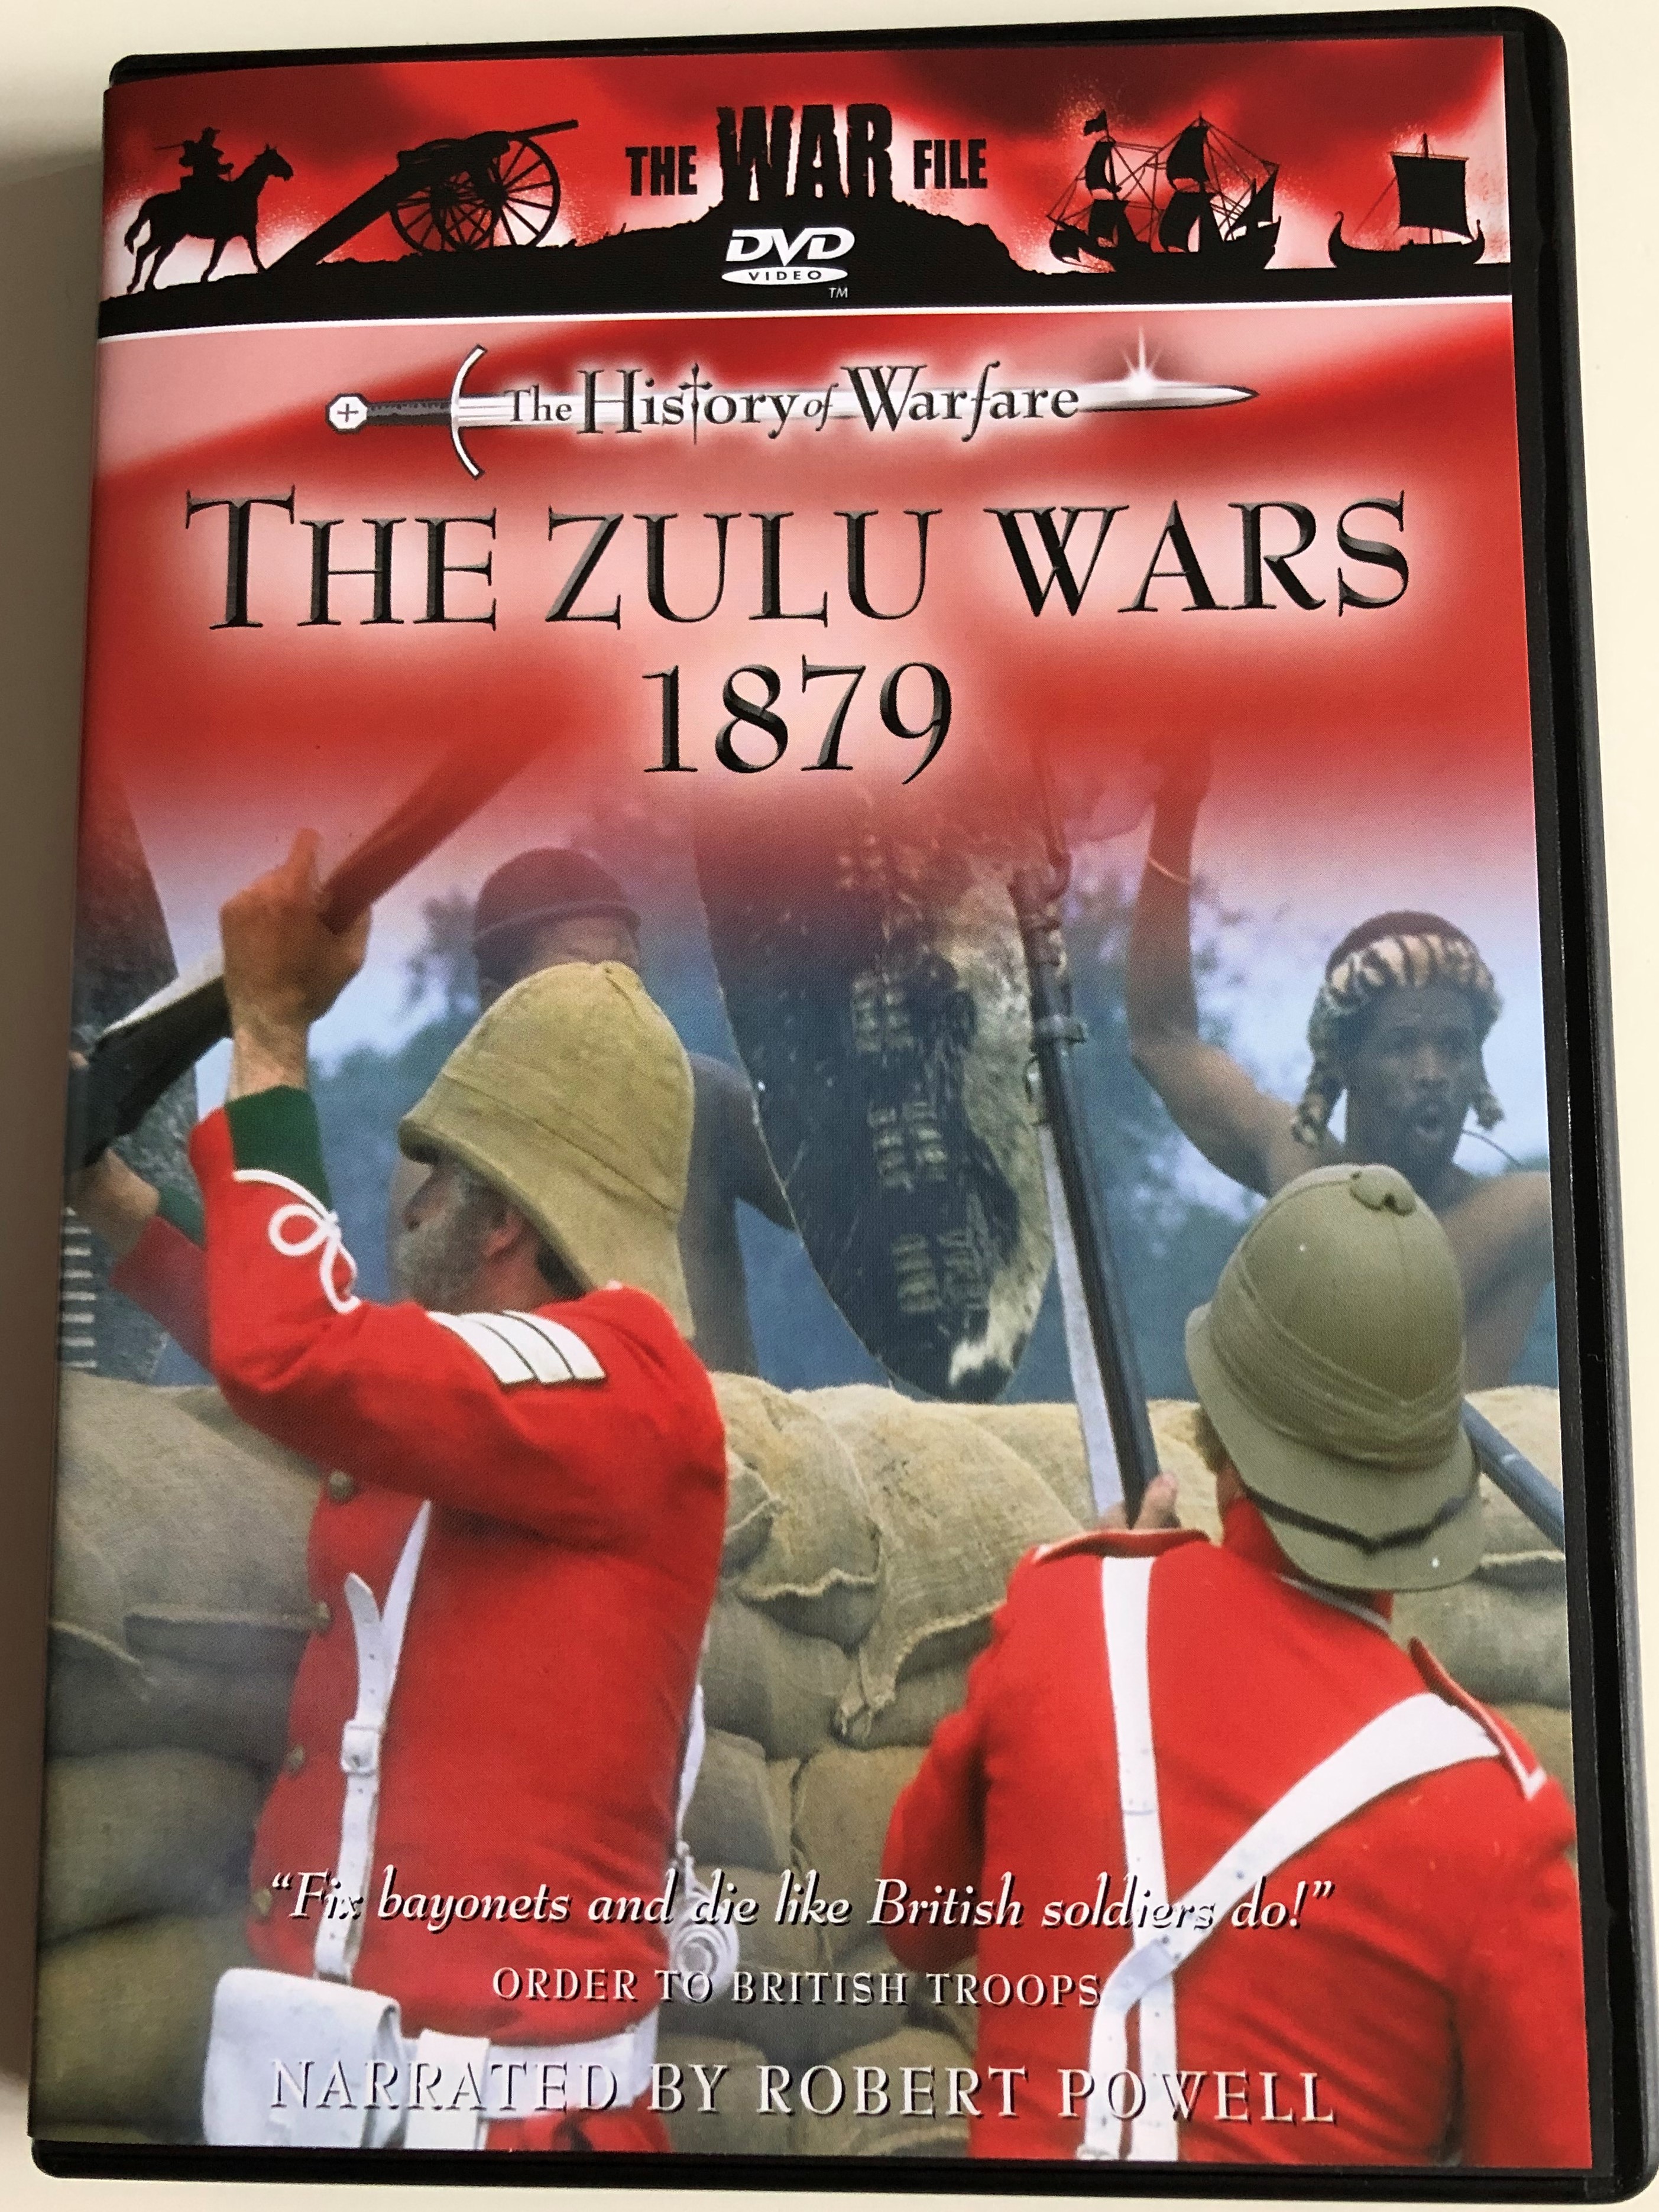 The Zulu Wars 1879 - The History of Warfare DVD 1996 / Cromwell productions  / NARRATED BY Robert Powell / THE WAR FILE DVD SERIES - bibleinmylanguage